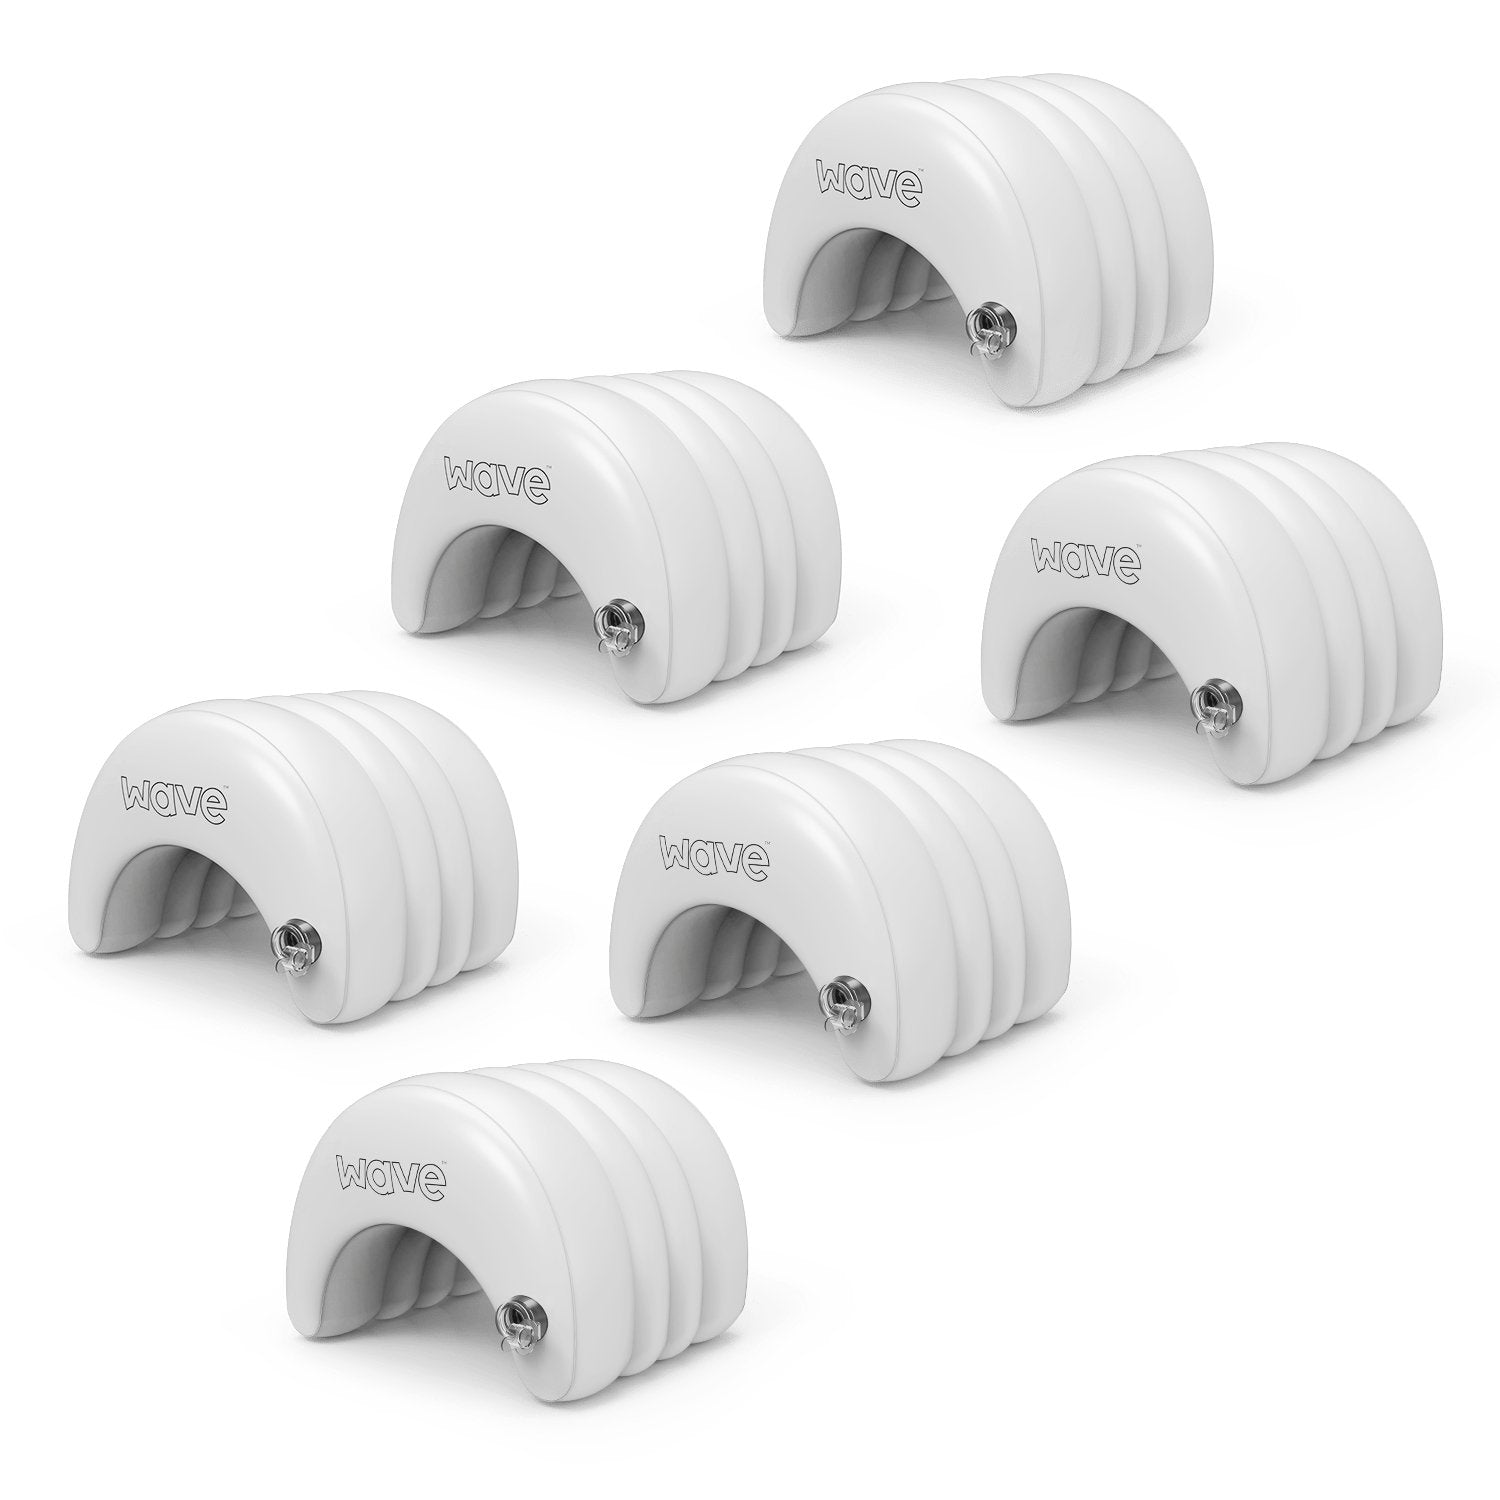 Inflatable Spa Head Rest Pillow | 6 Pack | White - Wave Spas Inflatable, foam Hot Tubs